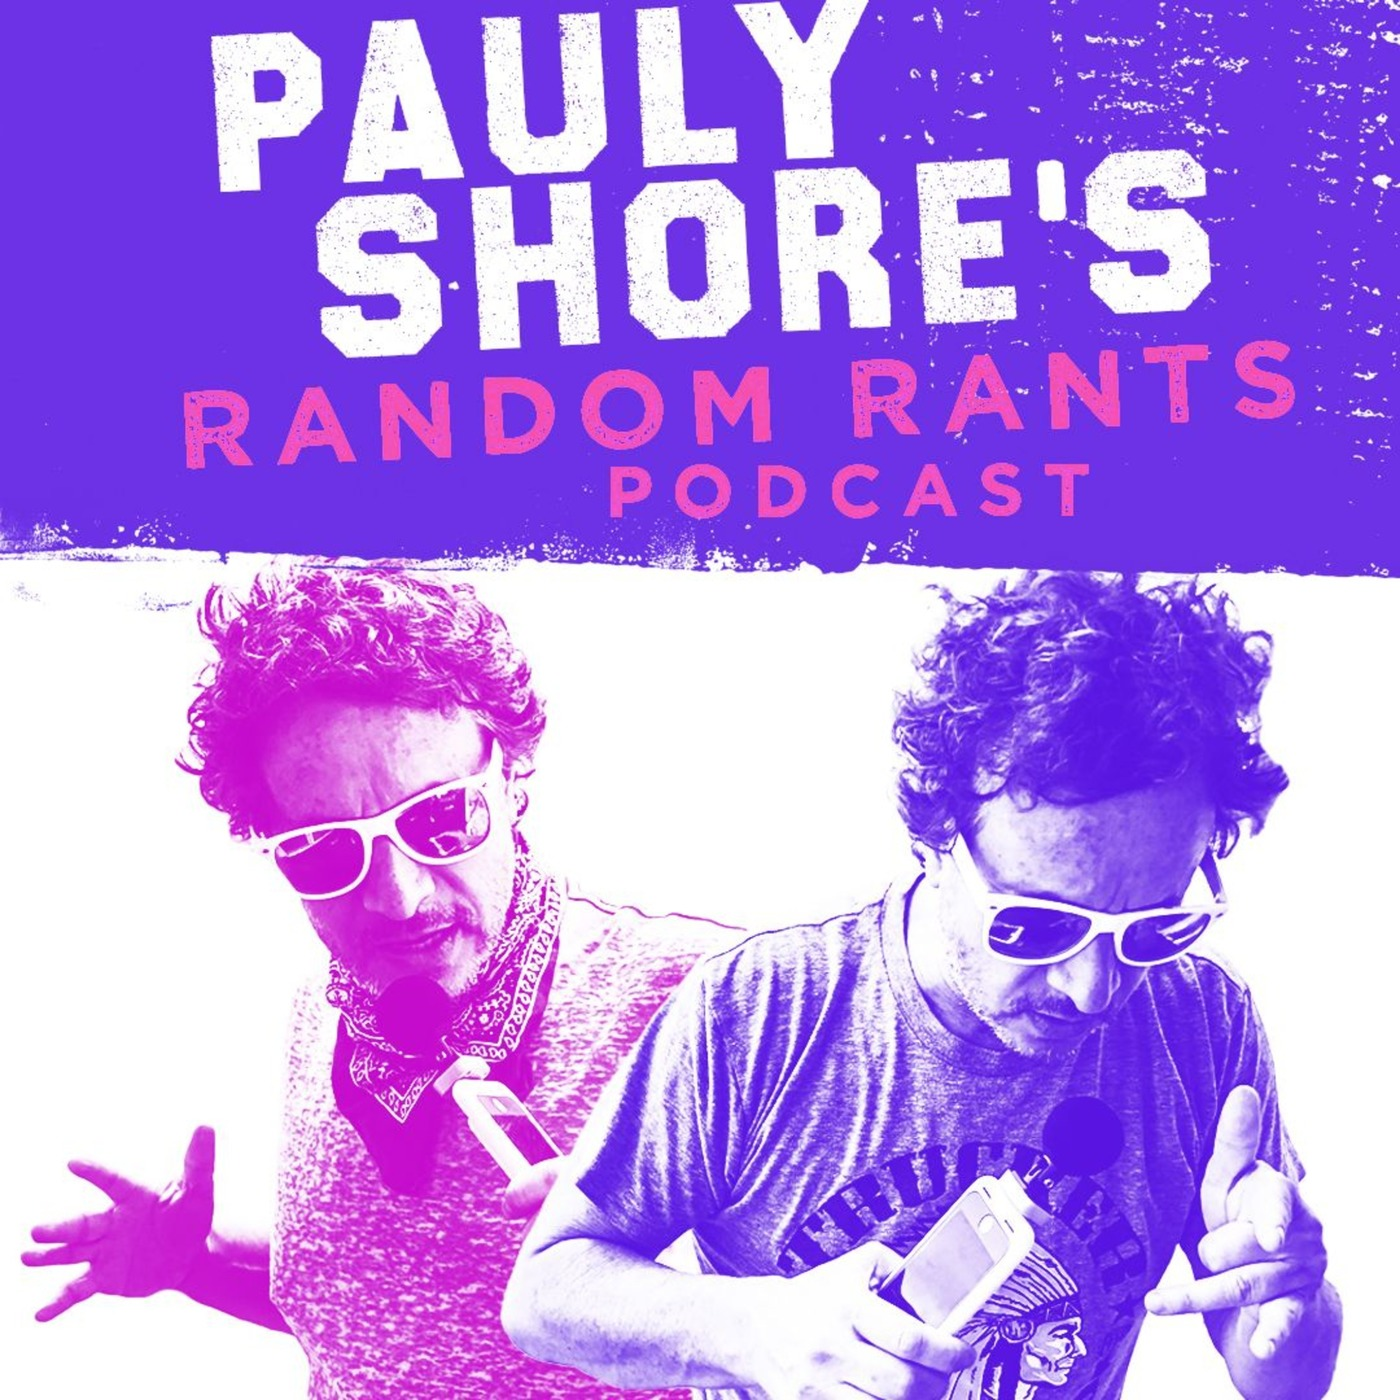 "Once Upon a Time in PAULYWOOD" - Pauly Shore's Random Rants 104